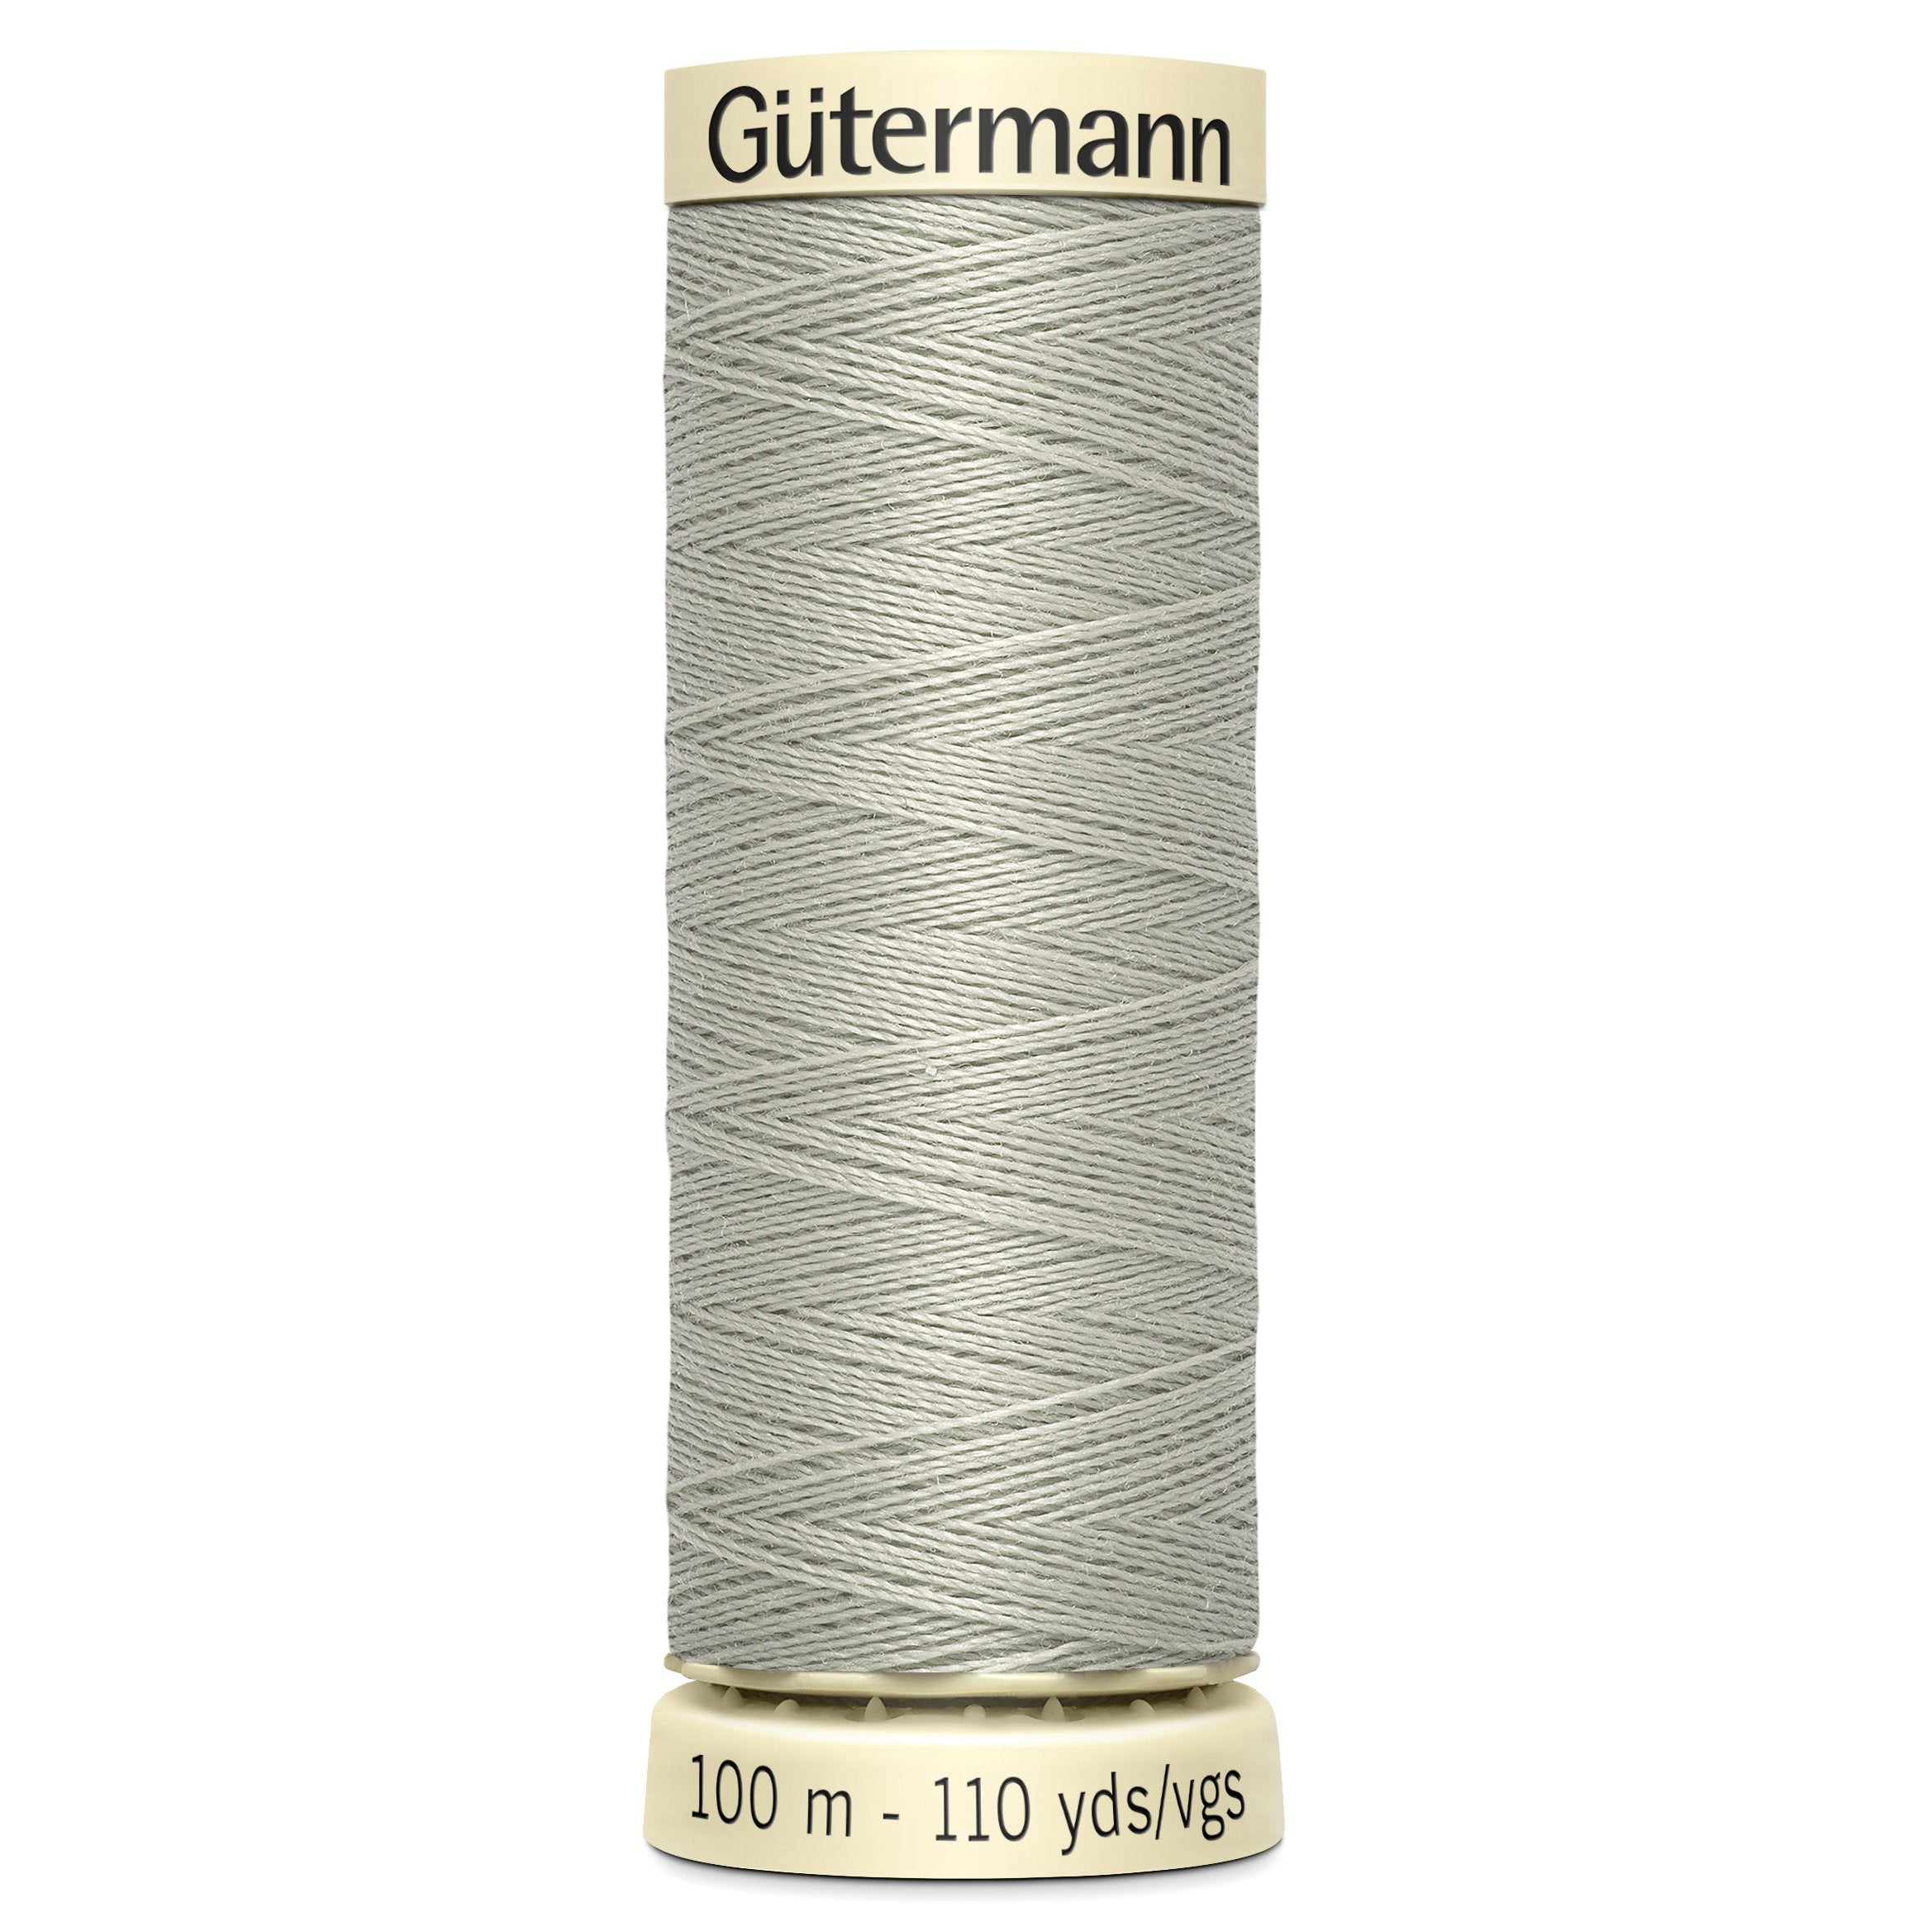 Gutermann Sew All Thread colour 854 Grey from Jaycotts Sewing Supplies